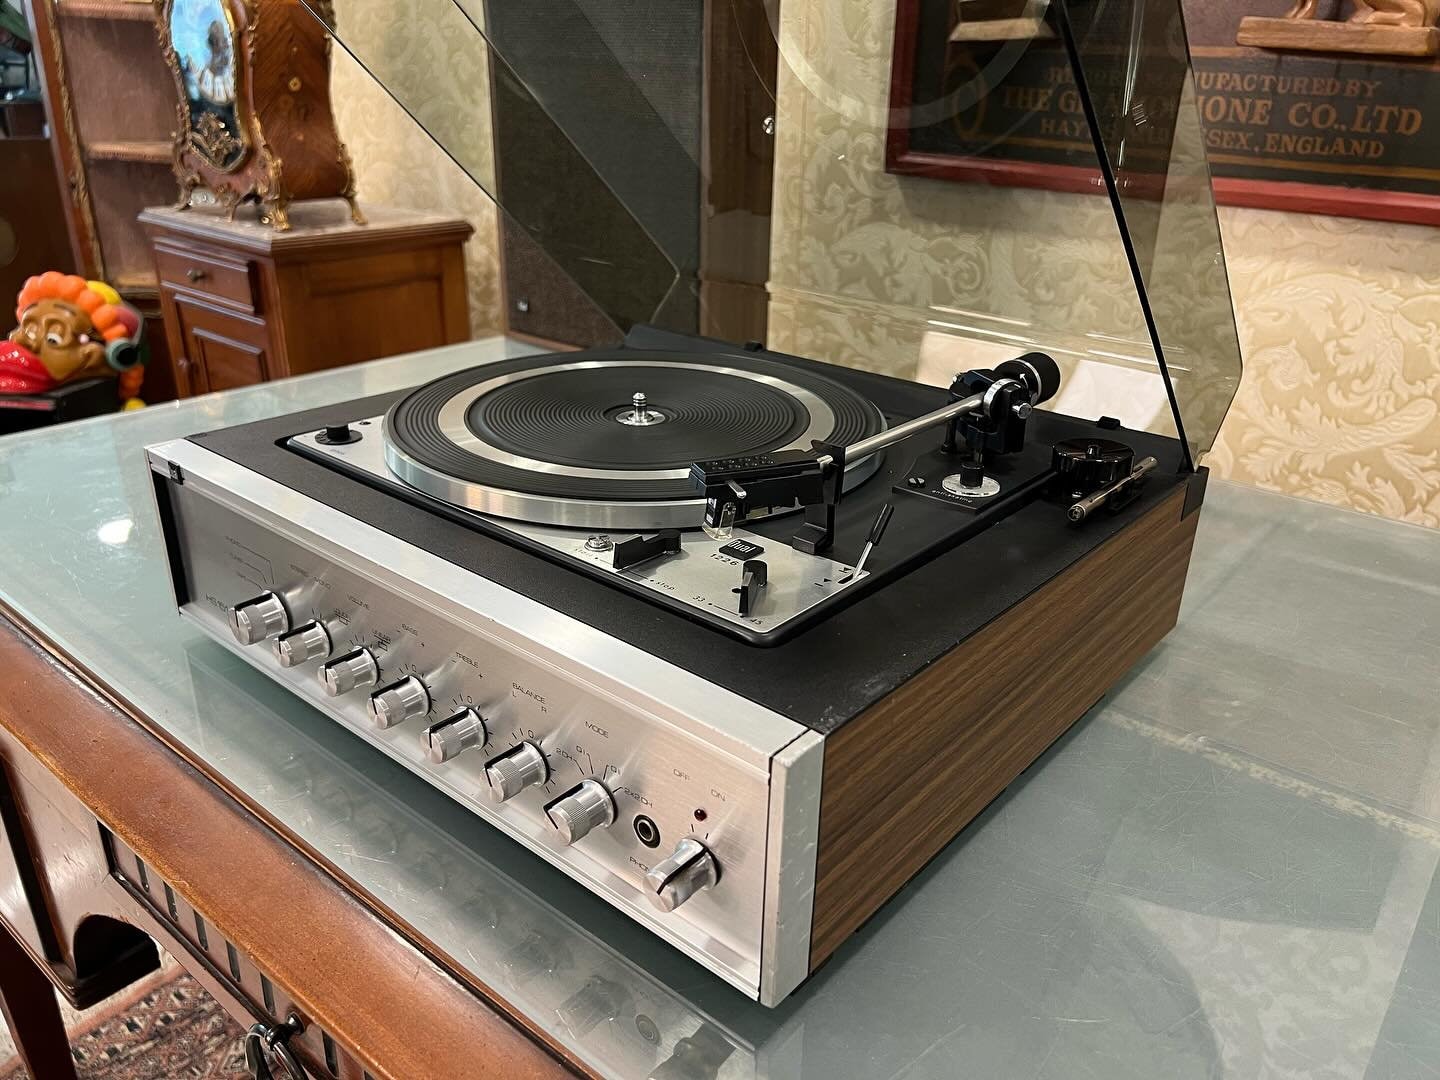 Flawless Dual HS 151 Flagship | Impeccable Condition | Includes CL 260 Speaker Set | Fully Functional- Turntable